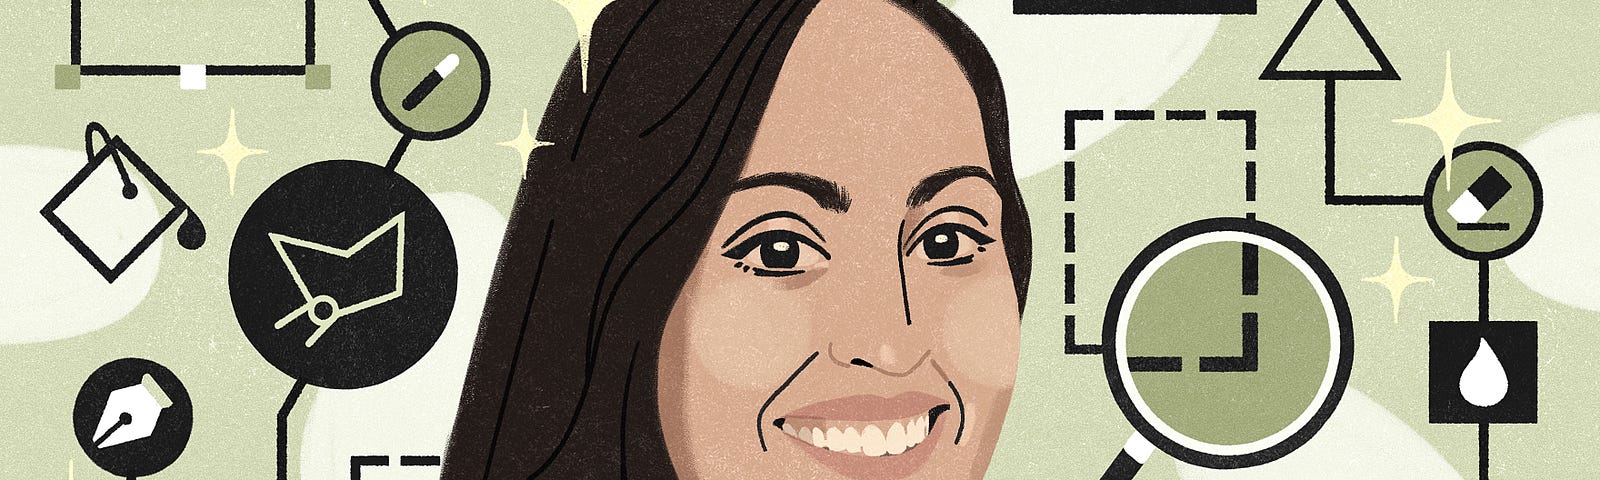 A digital illustration of an olive-skinned woman with long dark hair, with one side swept behind her left ear, wearing a black crew neck top. The background is light green and decorated with tool icons from Adobe Illustrator and Adobe Photoshop: Free Transform, Stamp, Paint Bucket, Text, Eyedropper, Pen Tool Eraser. and Lasso